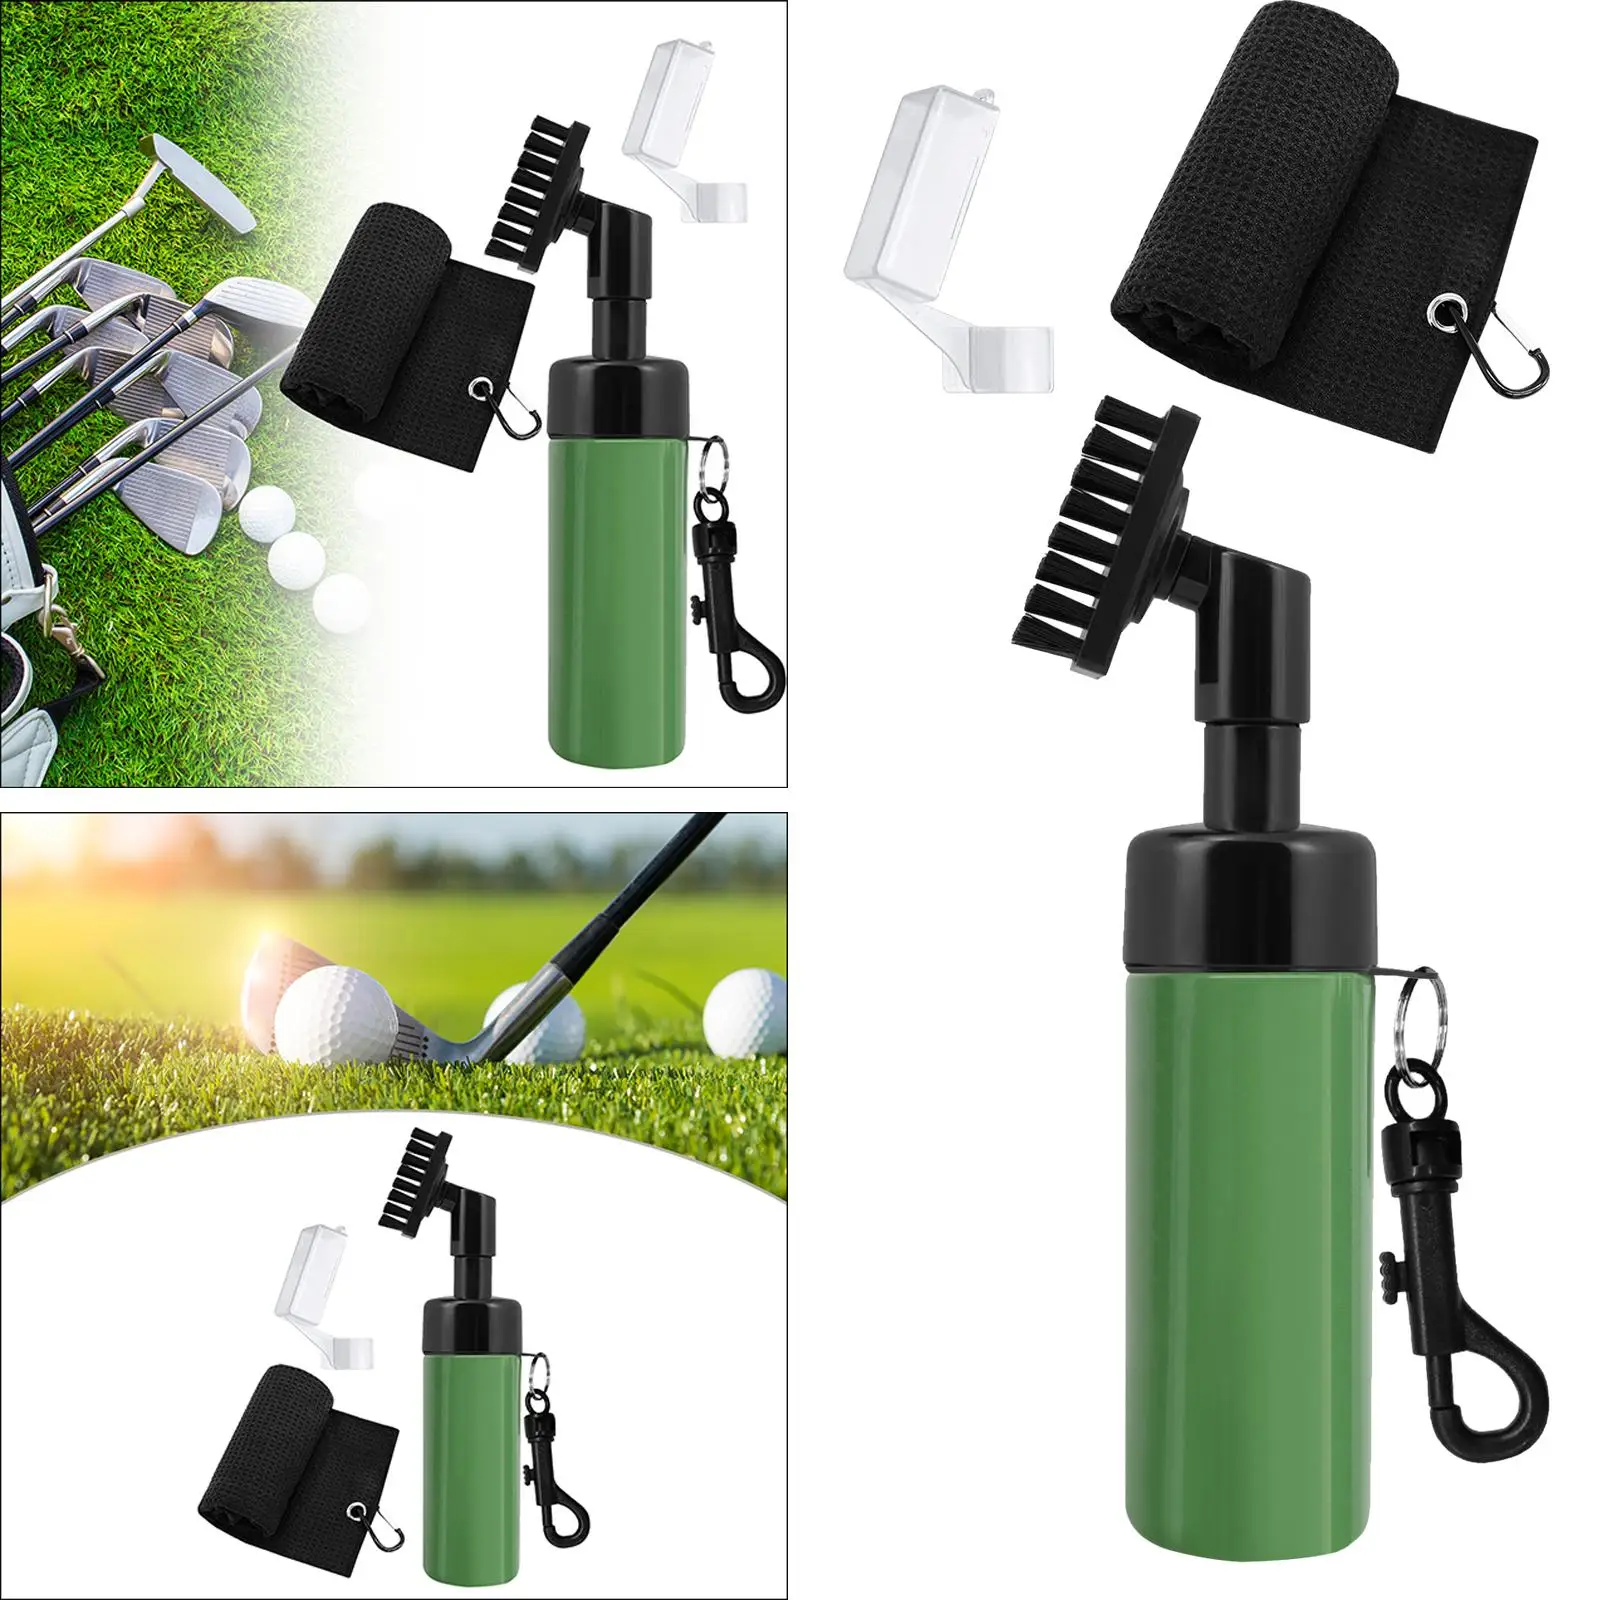 Golf Club Brush Cleaner Golf Club Cleaning Towel Wide Cleaning Coverage